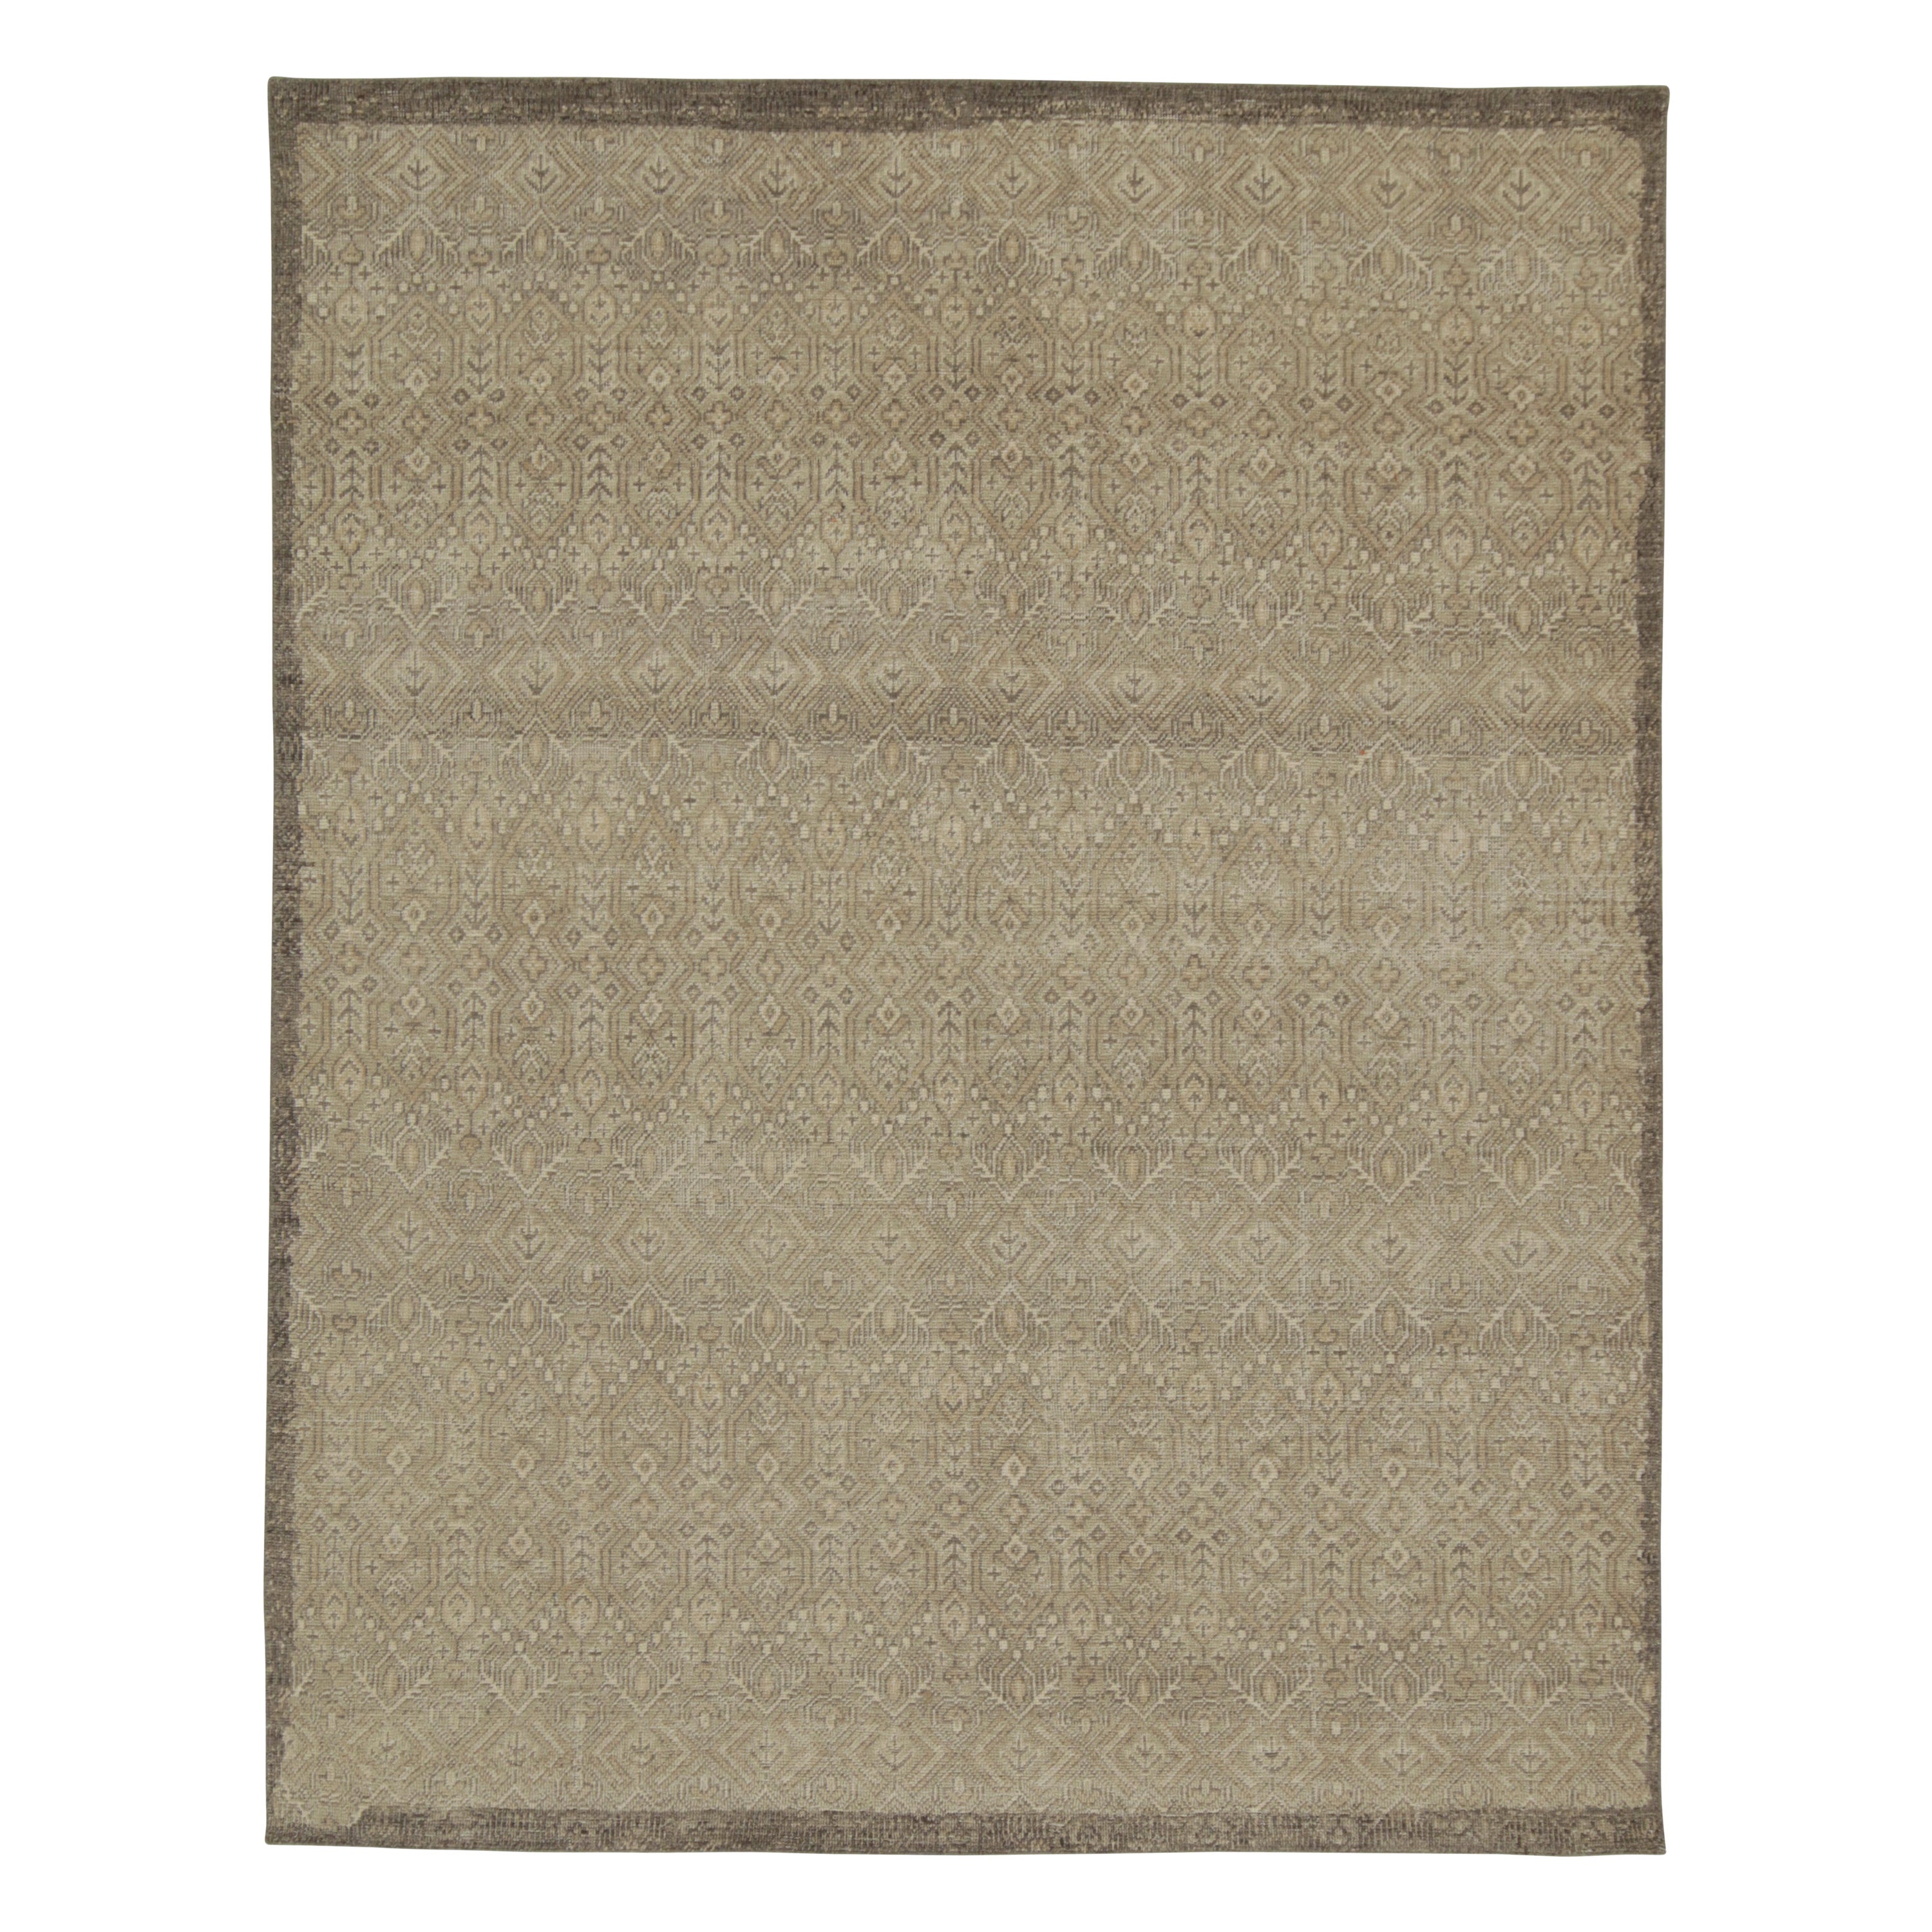 Rug & Kilim’s Distressed Tribal style rug in Beige and Gray Geometric Patterns